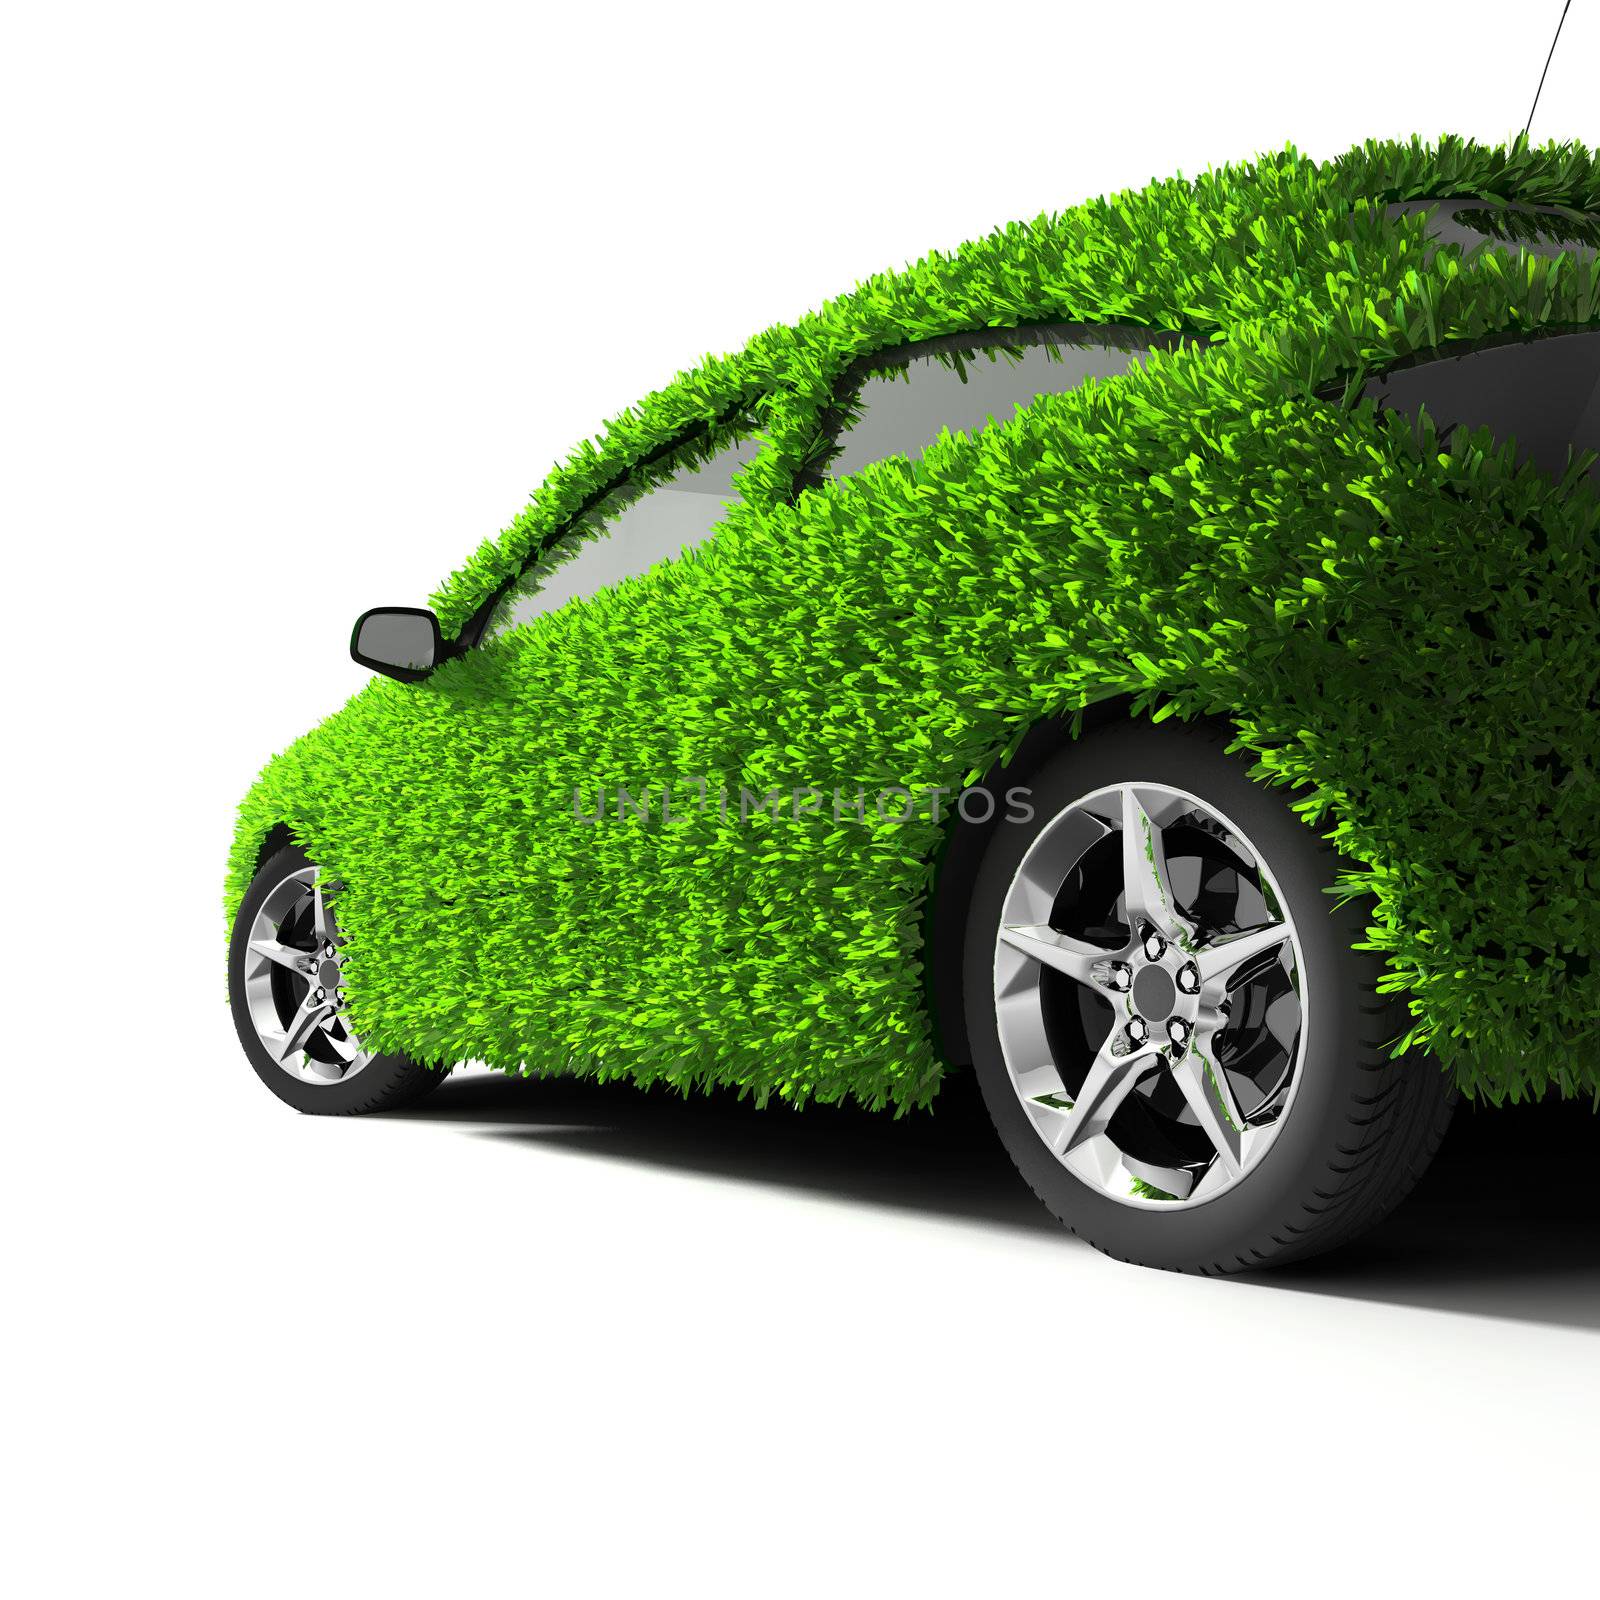 The metaphor of the green eco-friendly car by Antartis